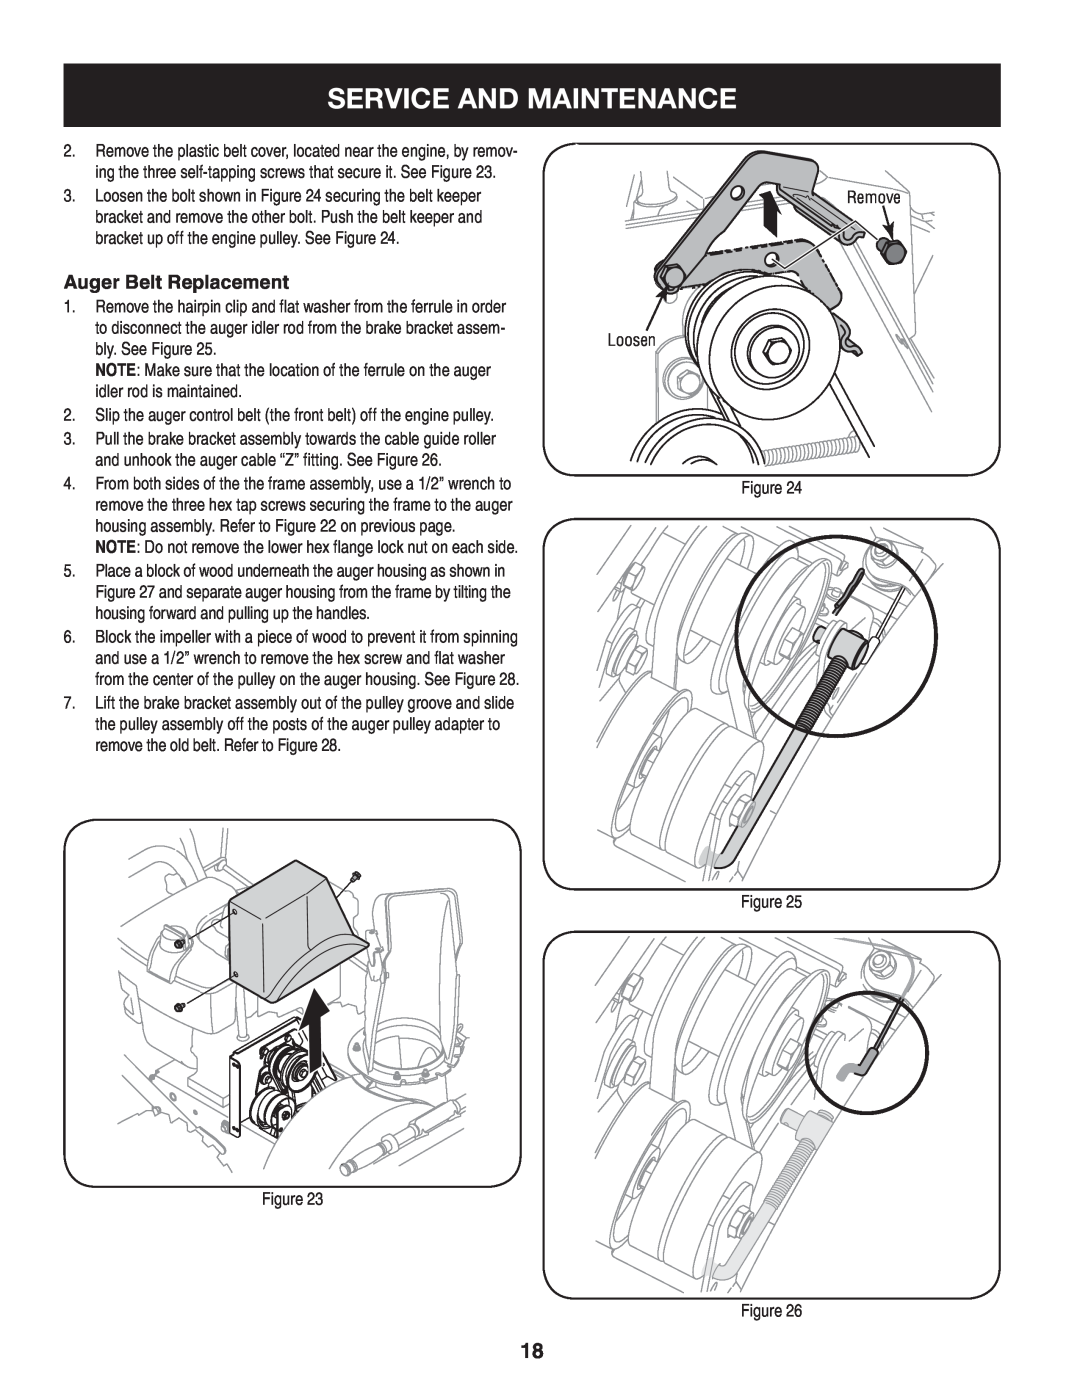 Craftsman 247.88045 manual Service And Maintenance, Auger Belt Replacement 